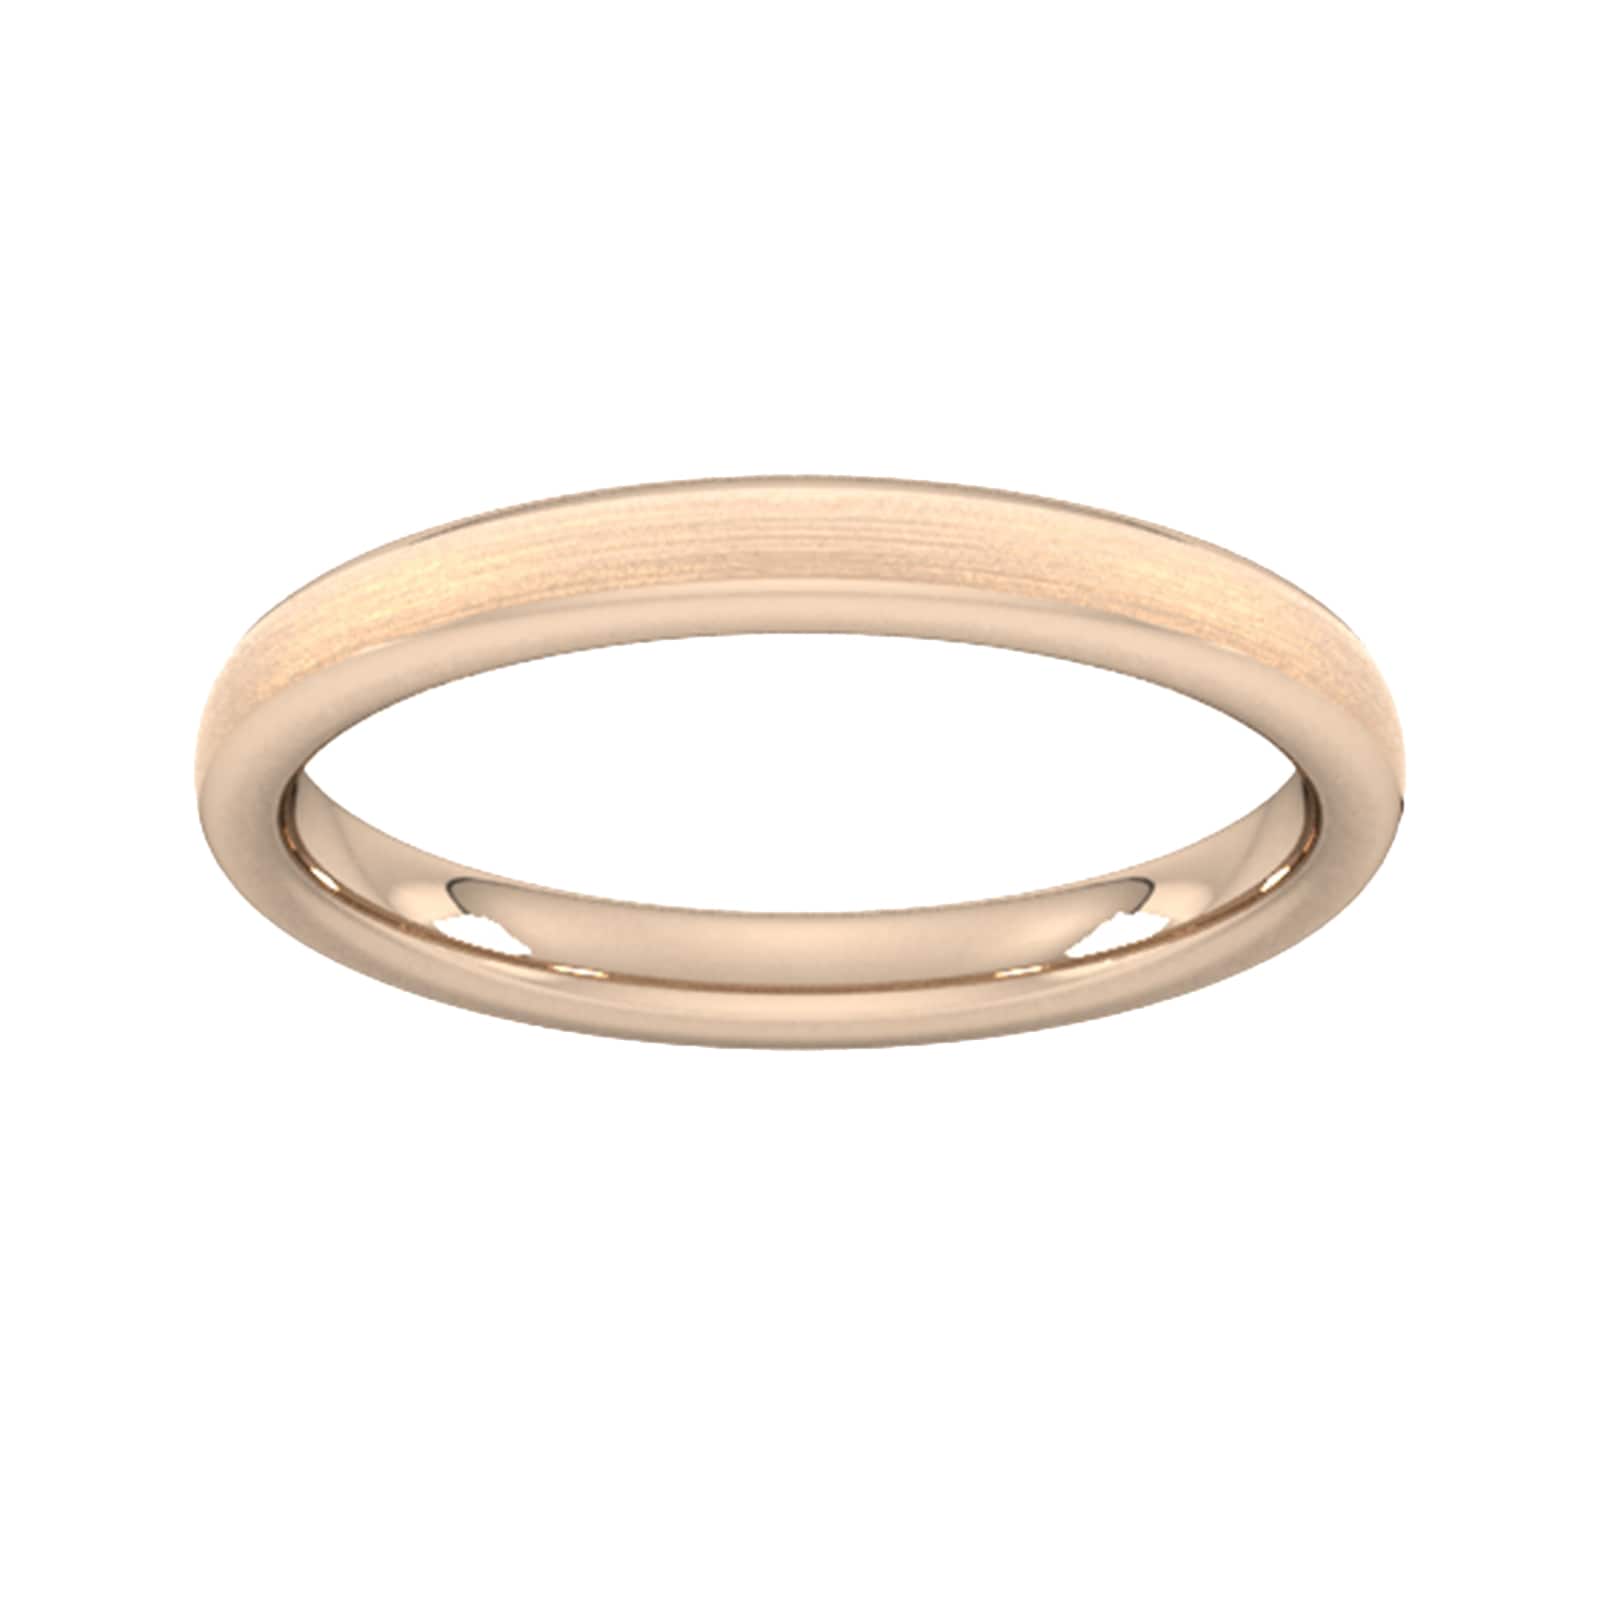 2.5mm Flat Court Heavy Matt Finished Wedding Ring In 9 Carat Rose Gold - Ring Size W